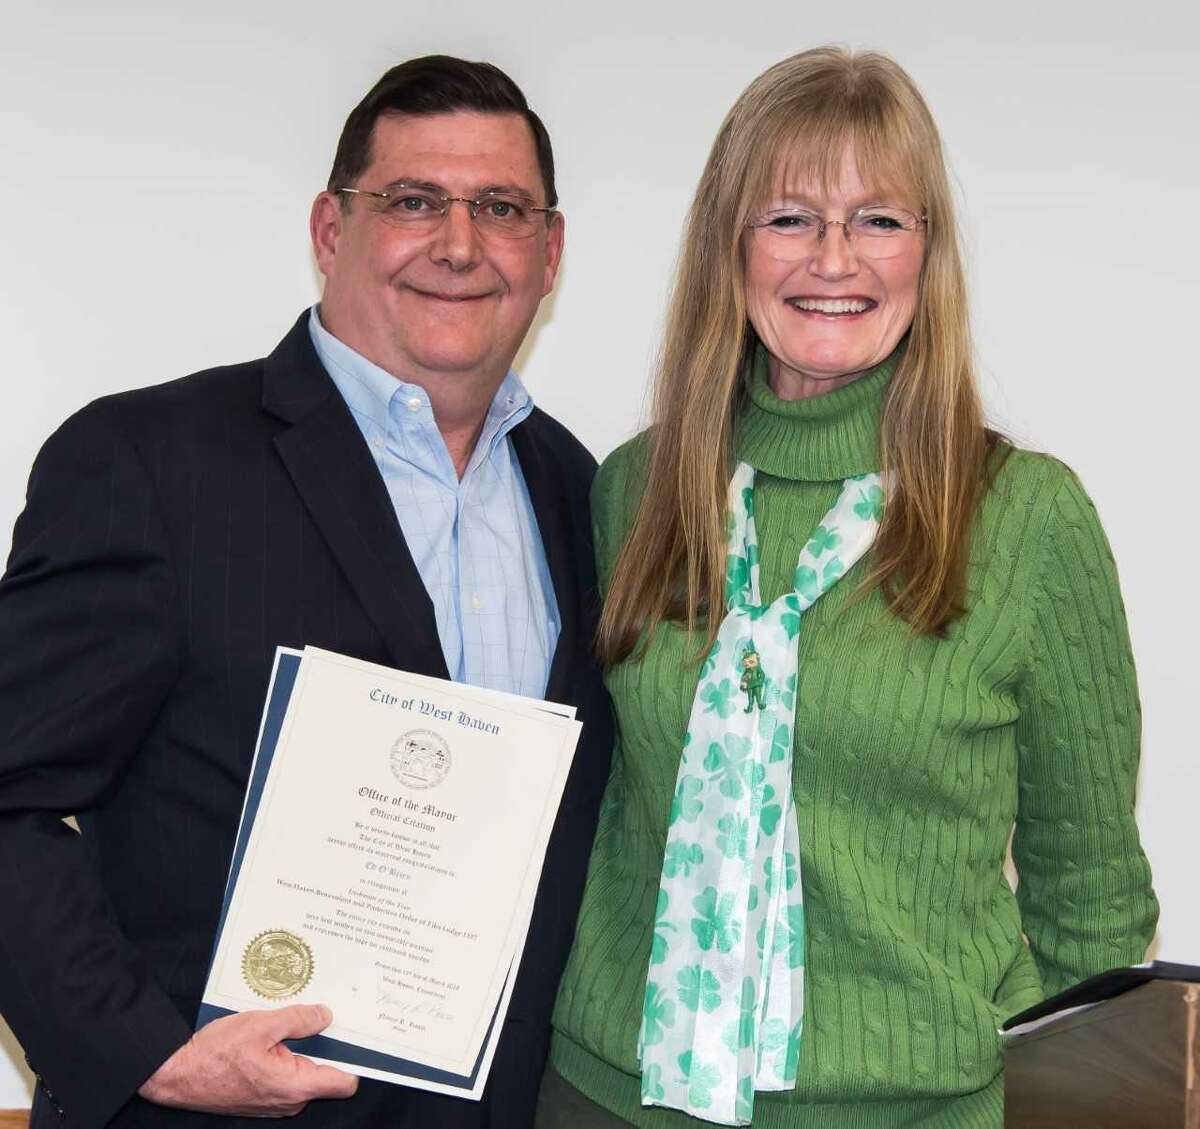 Former Mayor Ed O'Brien and current Mayor Nancy Rossi in a rare photograph together when O’Brien was honored on March 10, 2018 as the West Haven Elk's Lodge's "Irishman of the Year." As part of the ceremony, current Mayor Nancy Rossi presented O'Brien with a citation.